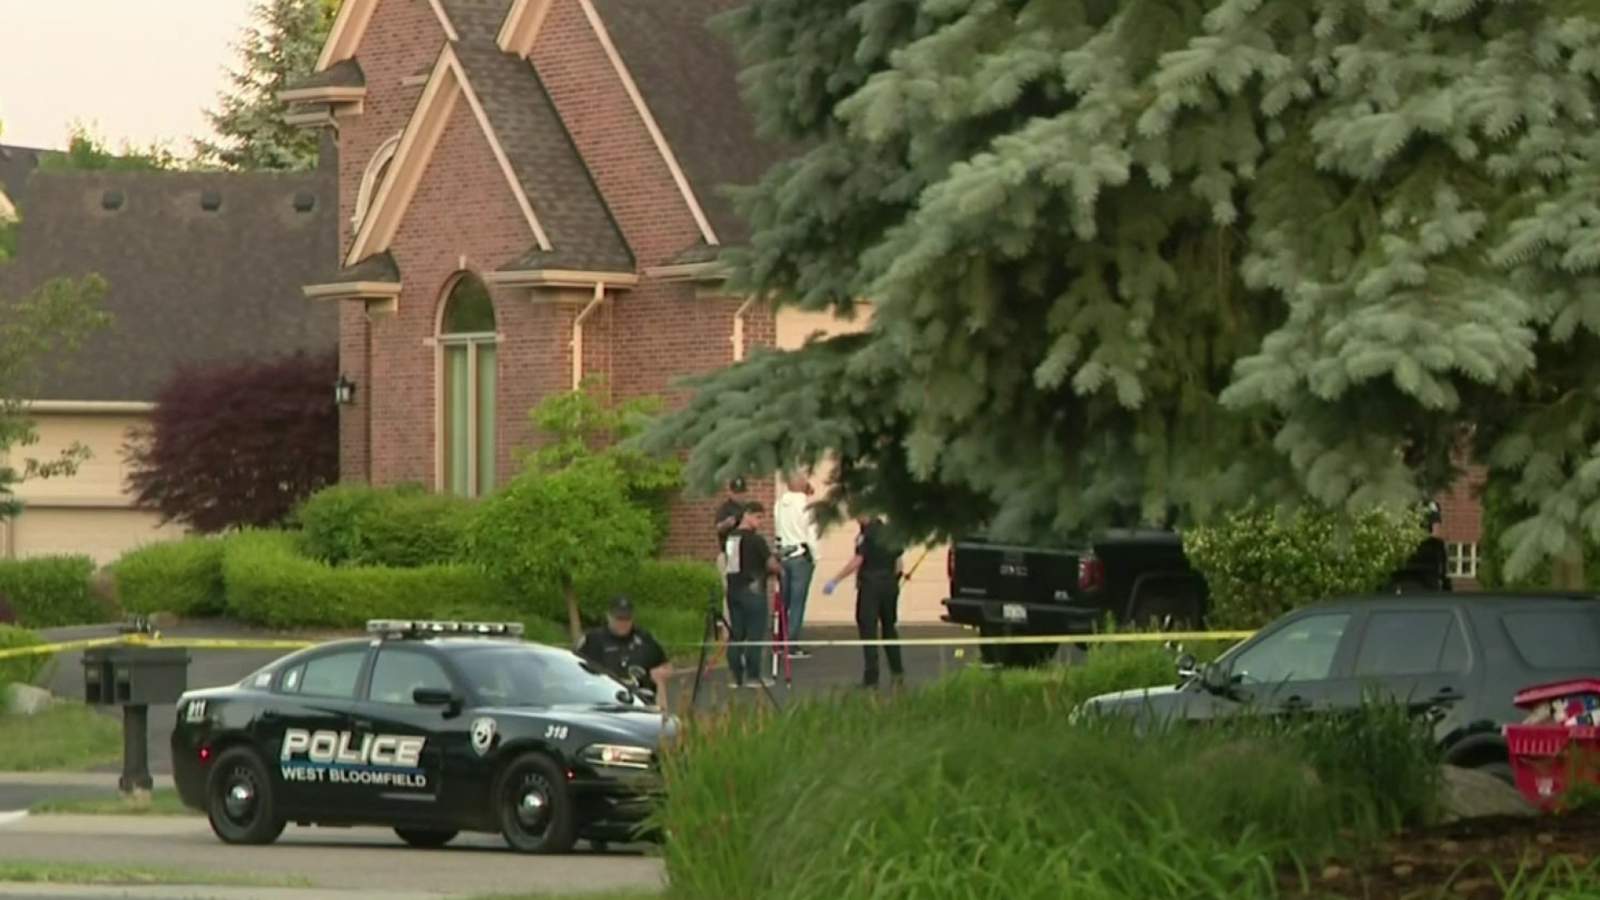 Police investigating after 1 killed, 2 injured in shooting at West Bloomfield home